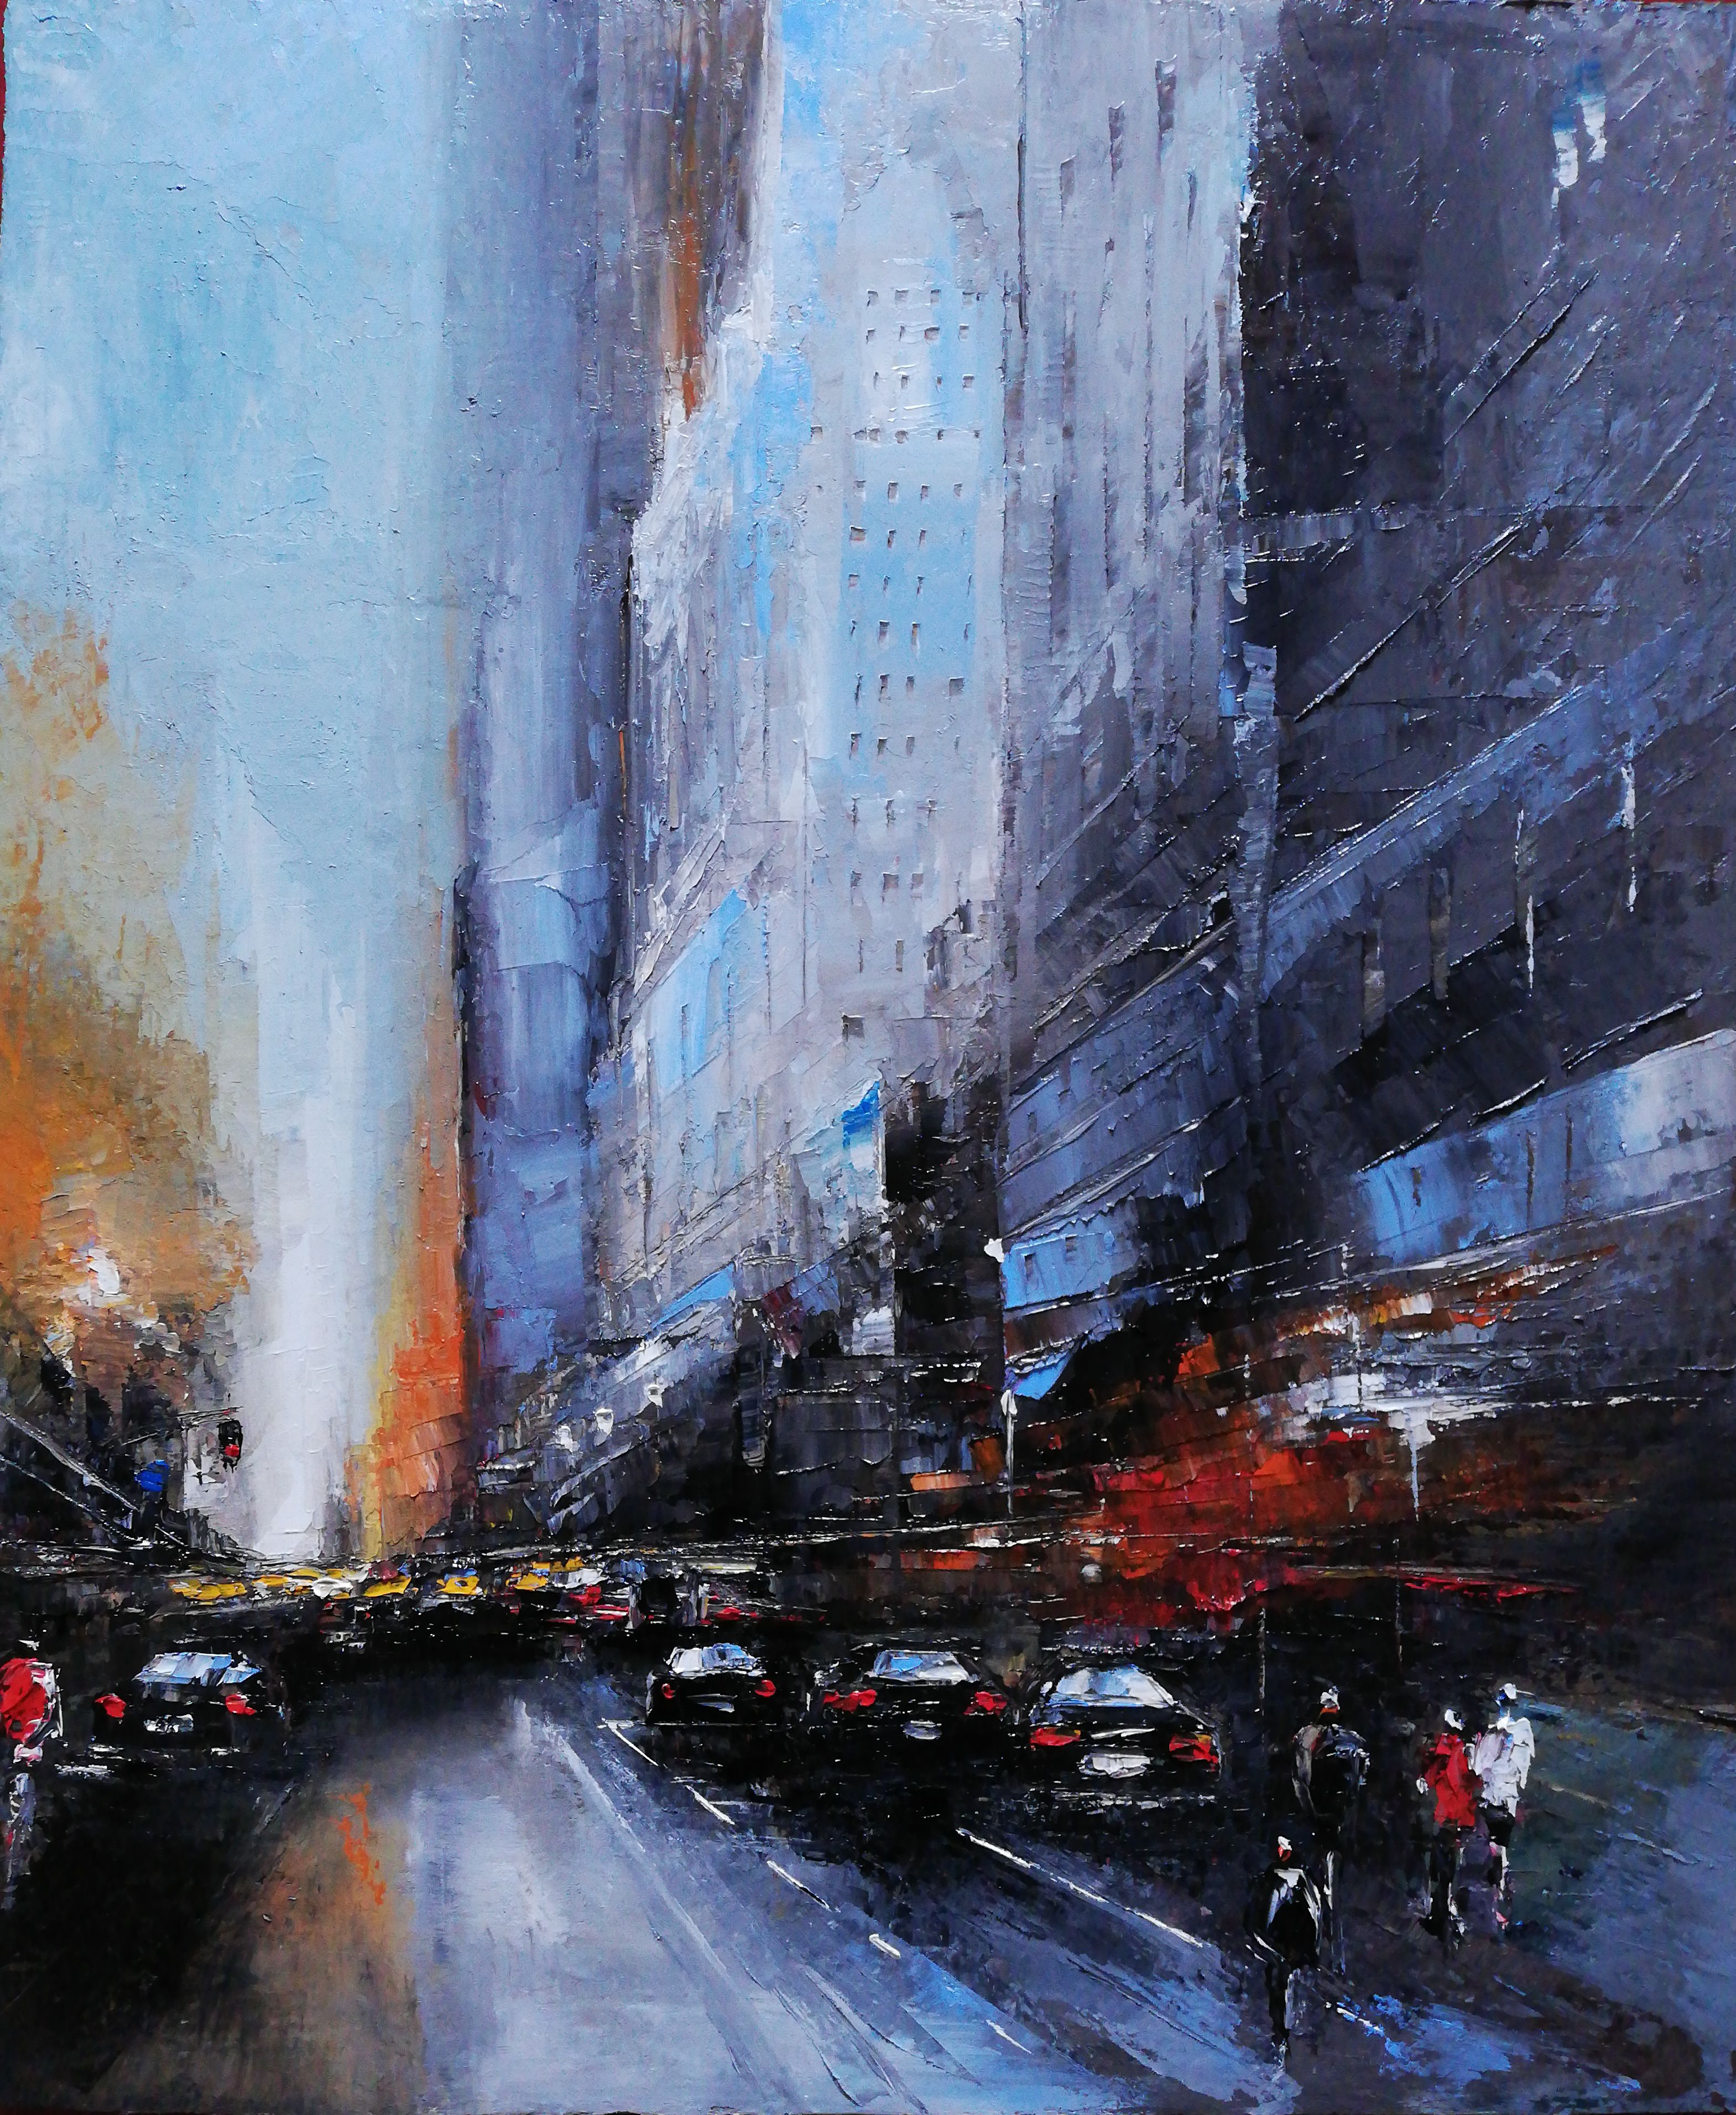 Philippe Meslin "Manhattan traffic Huile sur lin" painting, is a figurative coloured oil painting of a Manhattan street scene.